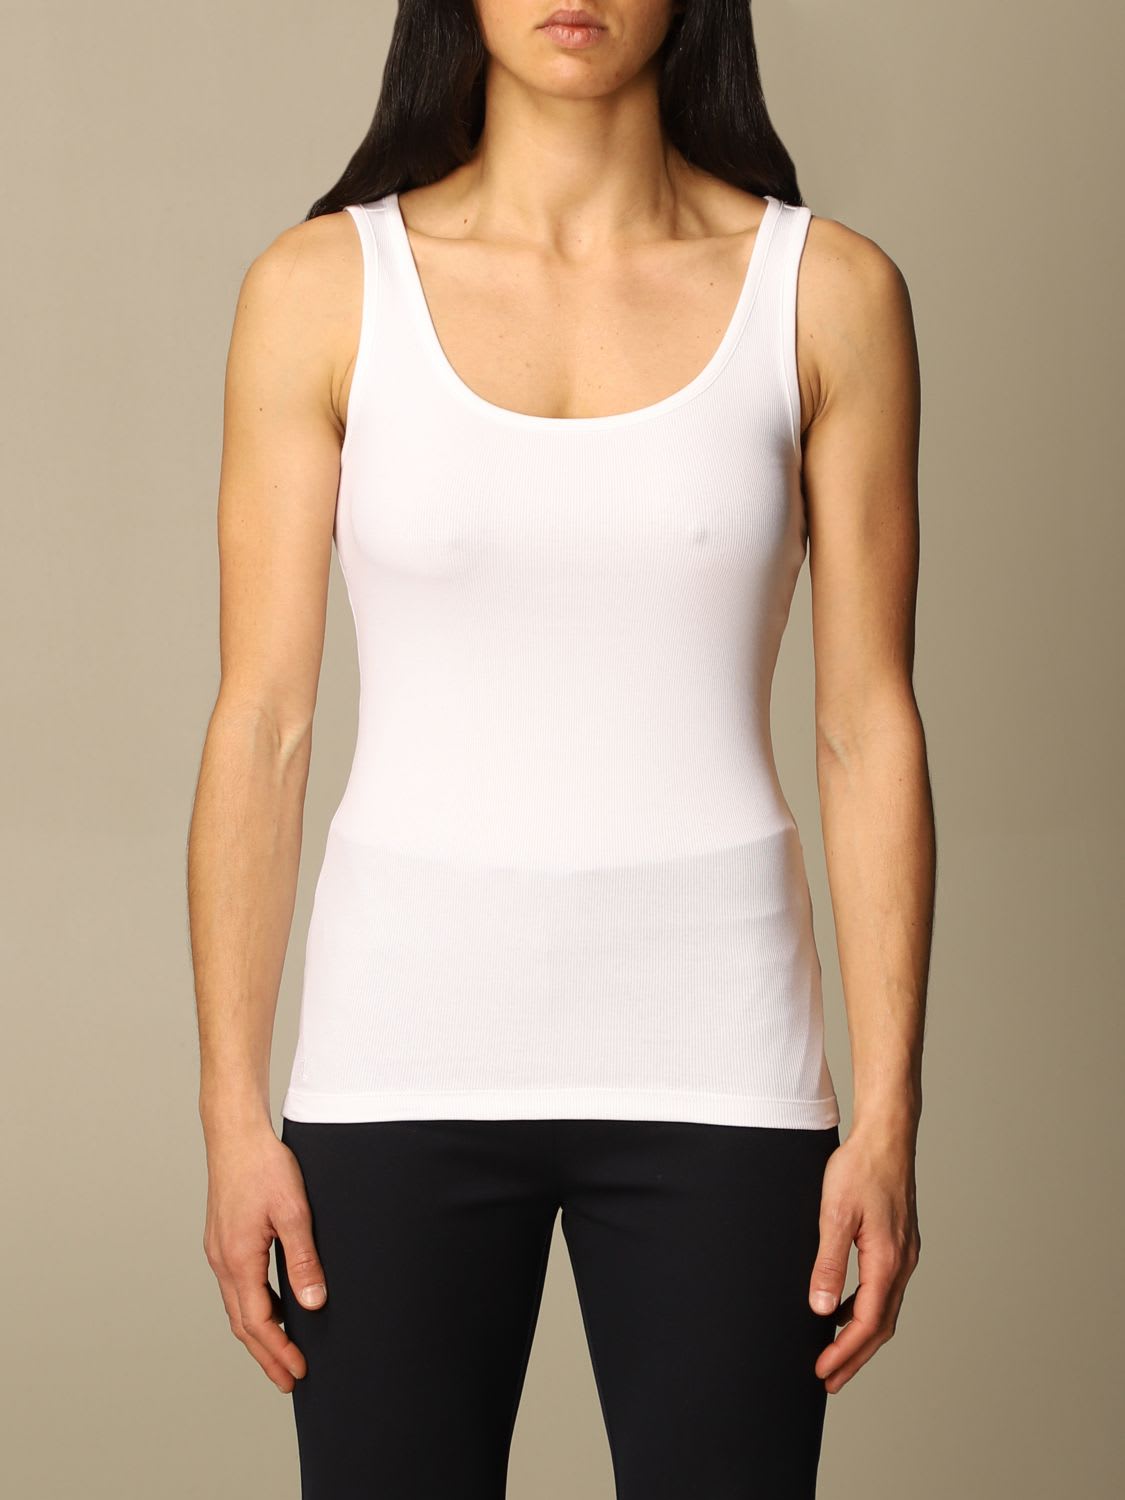 Lauren Ralph Lauren Top Lauren Ralph Lauren Basic Tank Top In Stretch Cotton